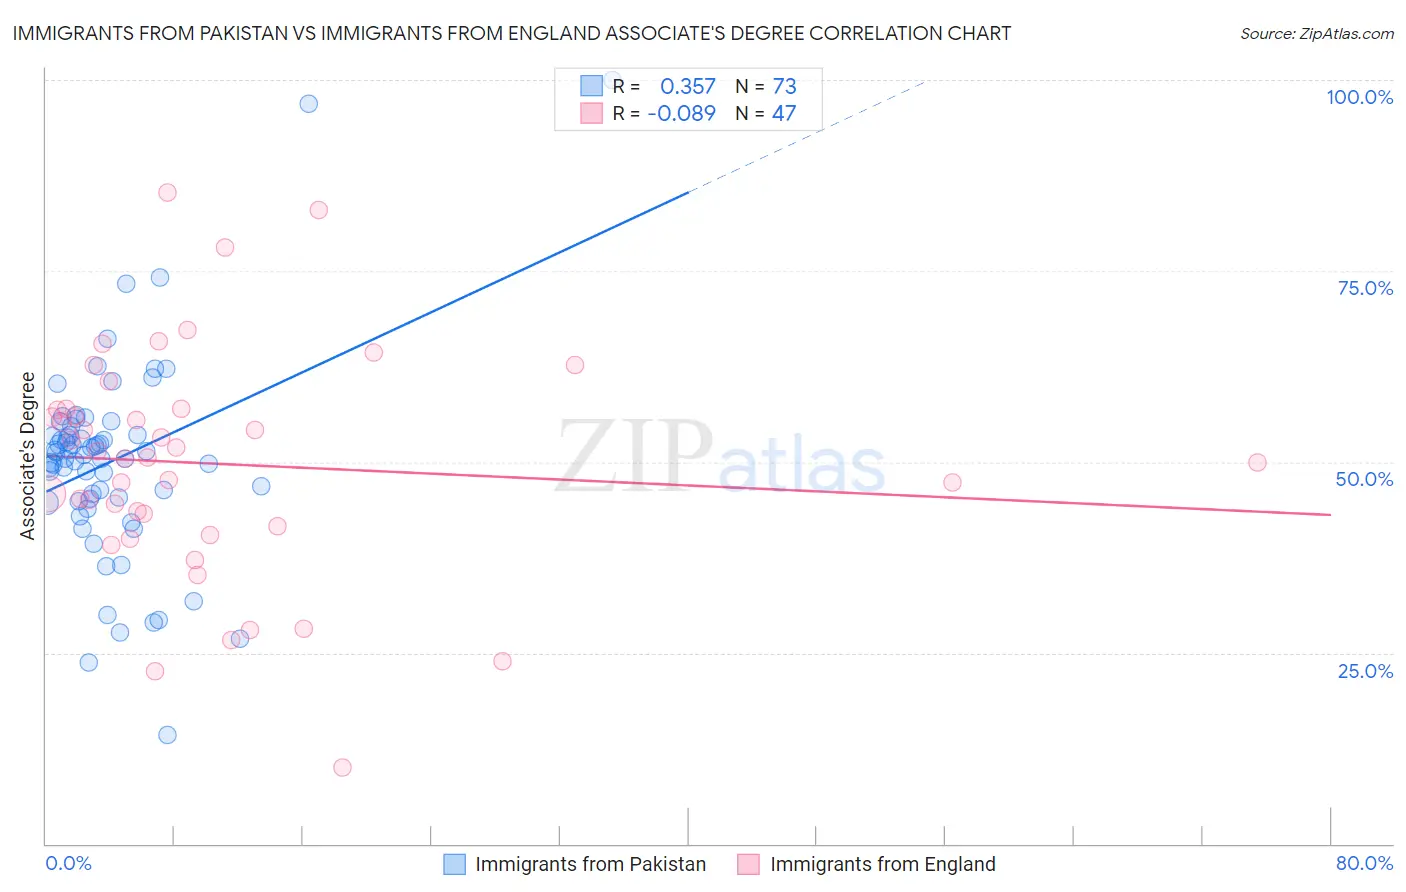 Immigrants from Pakistan vs Immigrants from England Associate's Degree